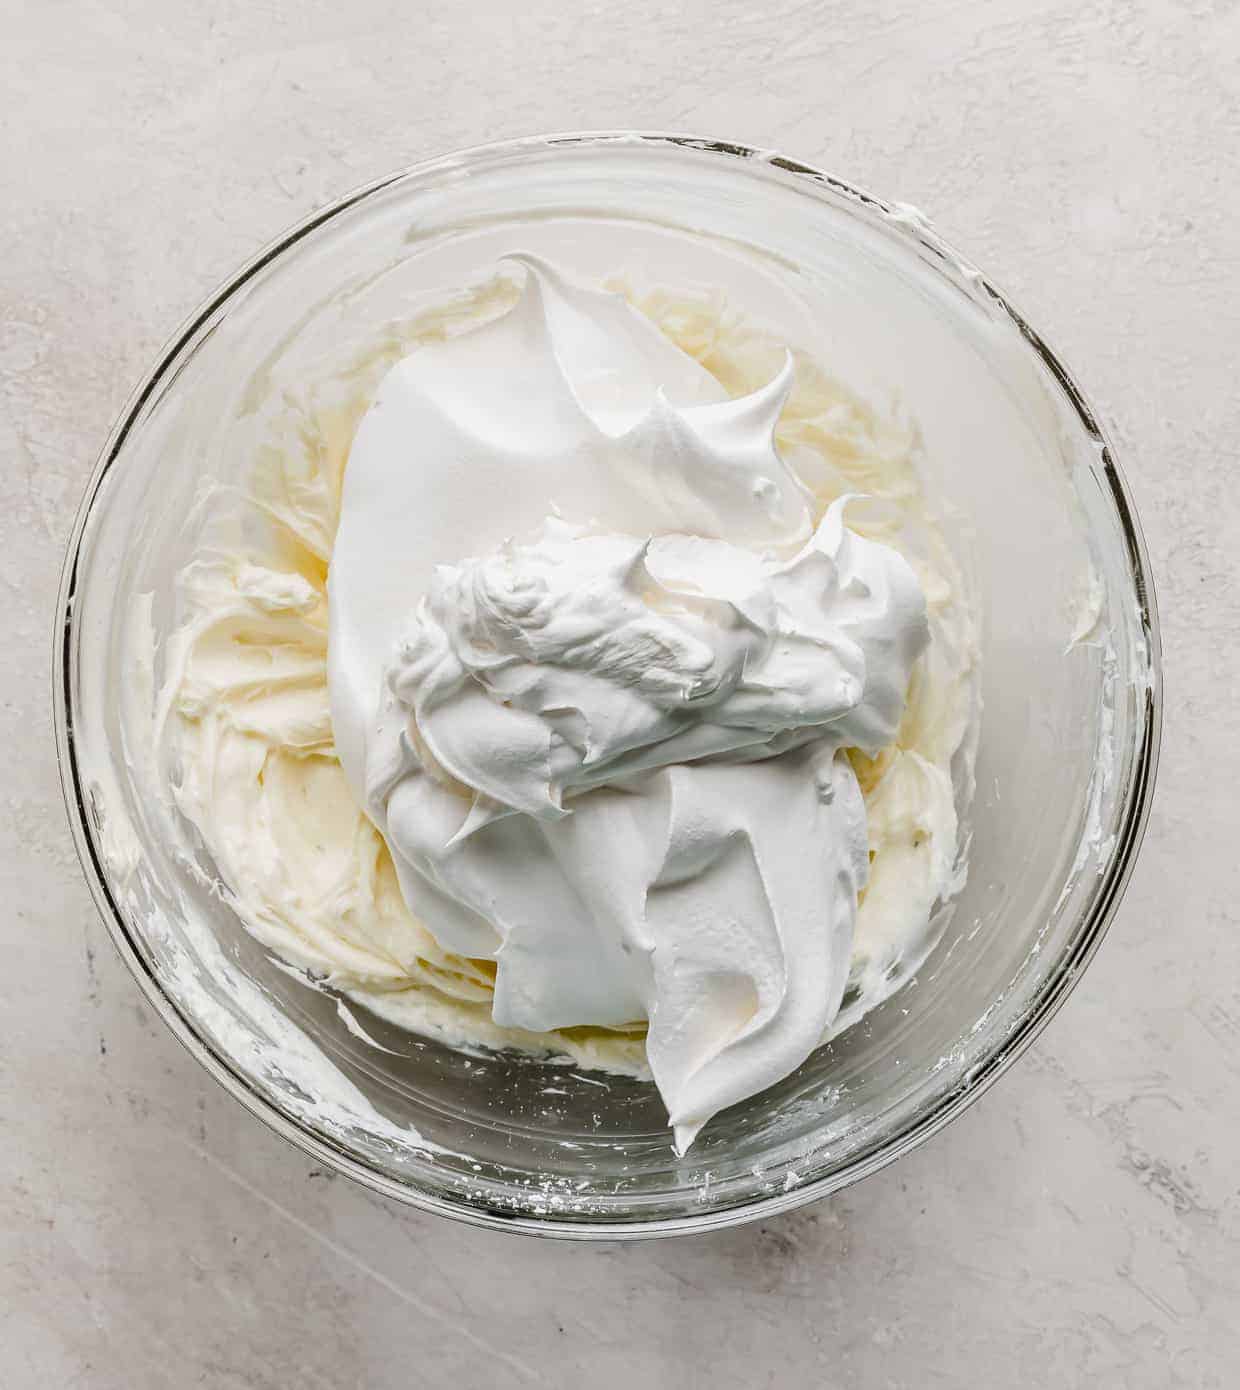 A large dollop of Cool Whip overtop a creamed cream cheese layer in a glass bowl.